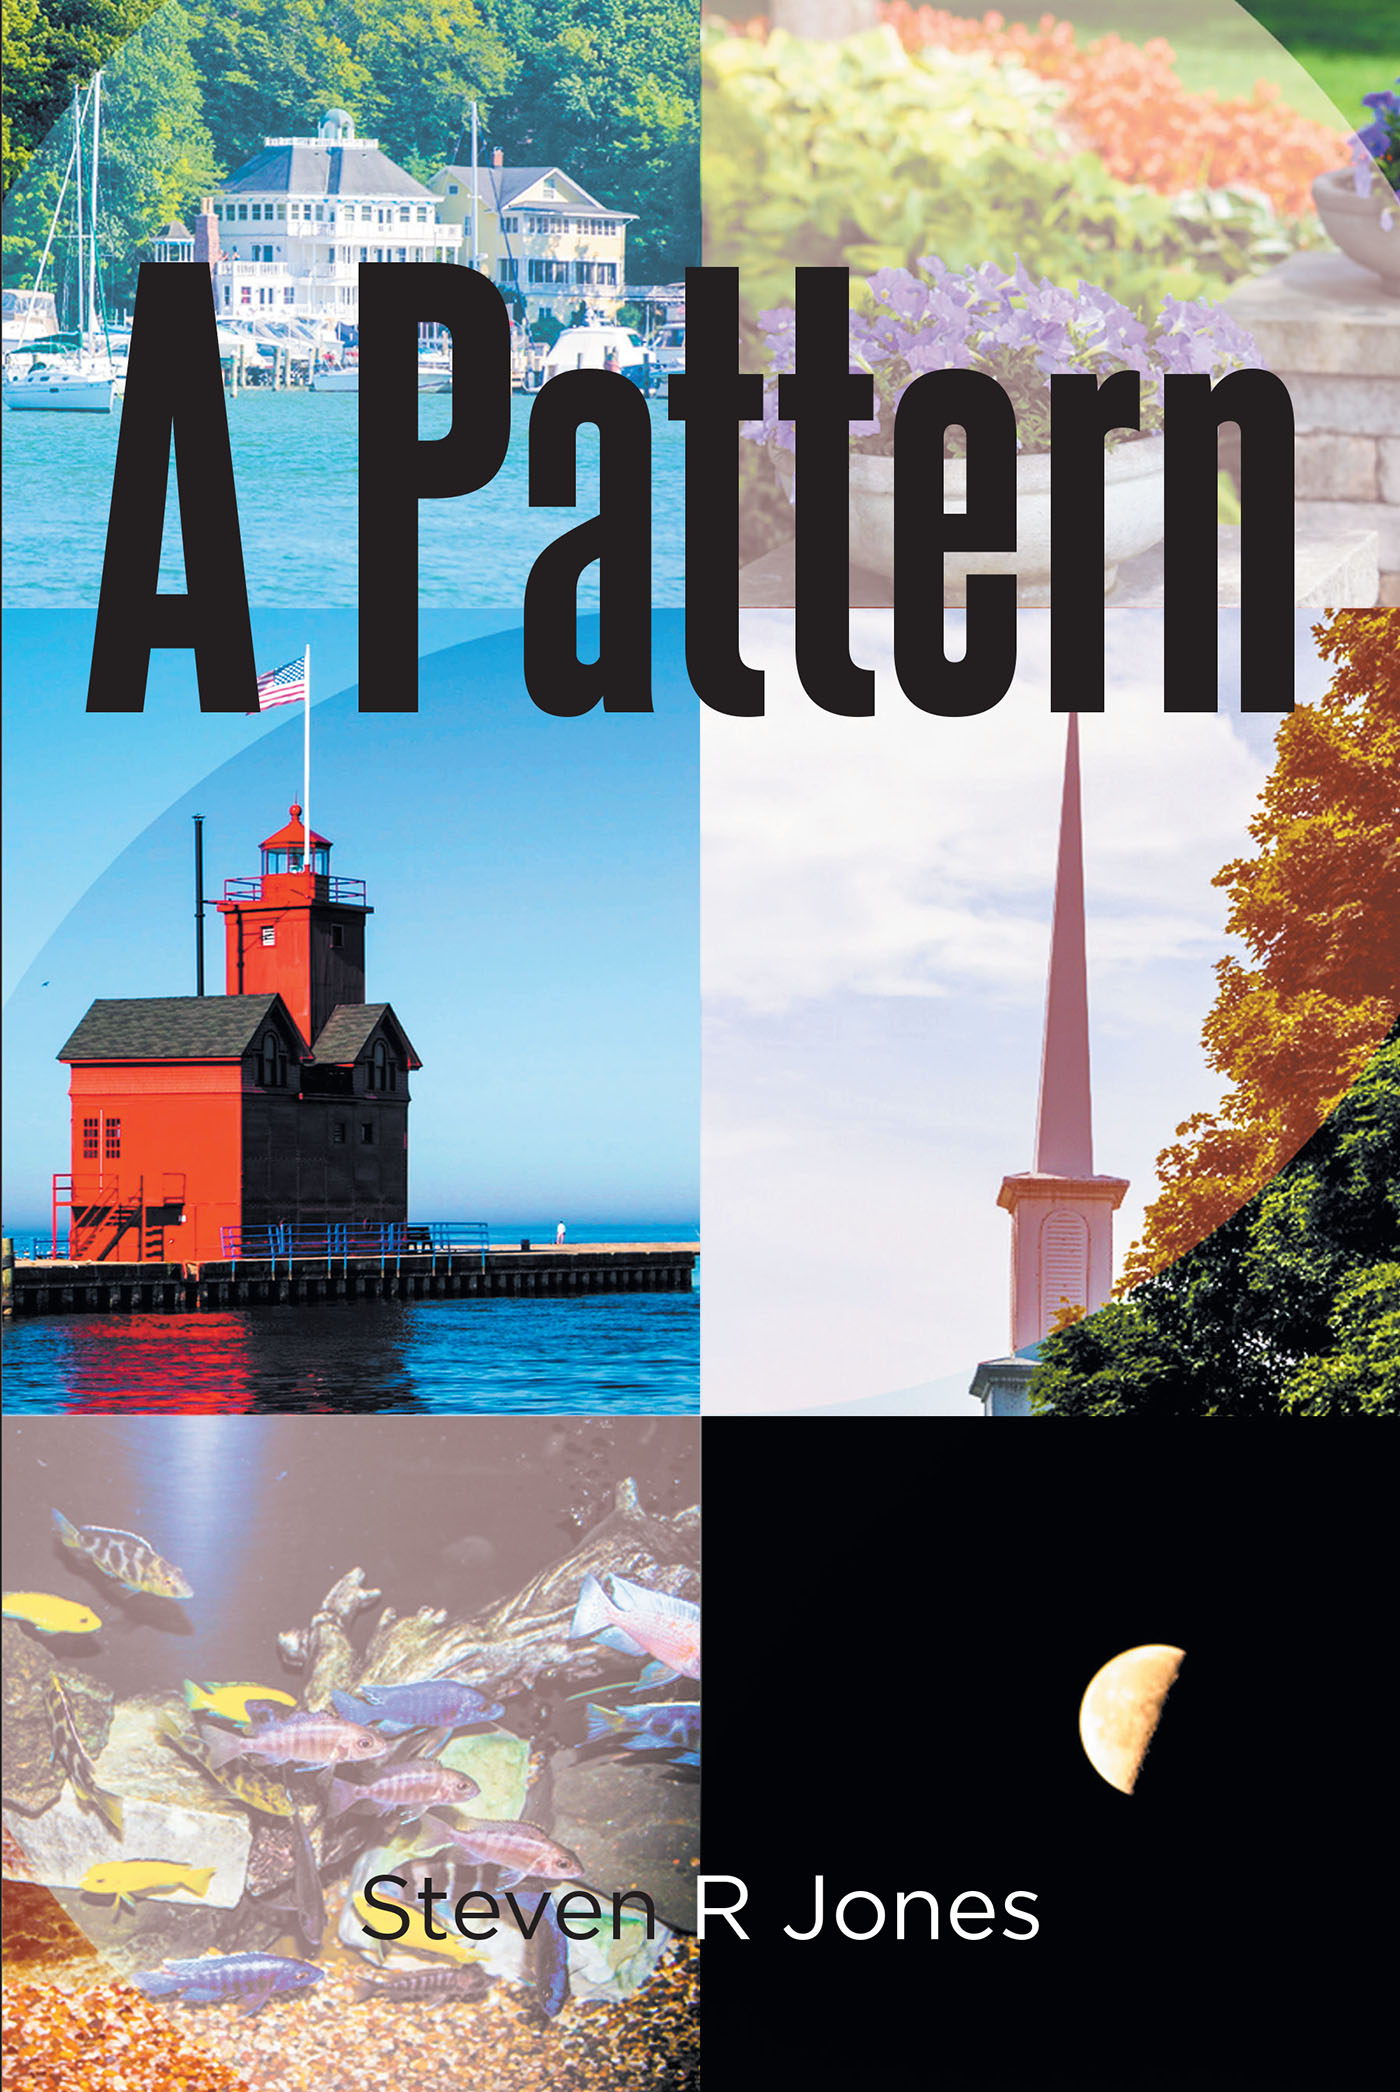 Author Steven R Jones’s New Book, "A Pattern," is a Gripping Story of a Pastor and a Detective Who Become Partners and Work Together to Investigate a Local Crime Spree